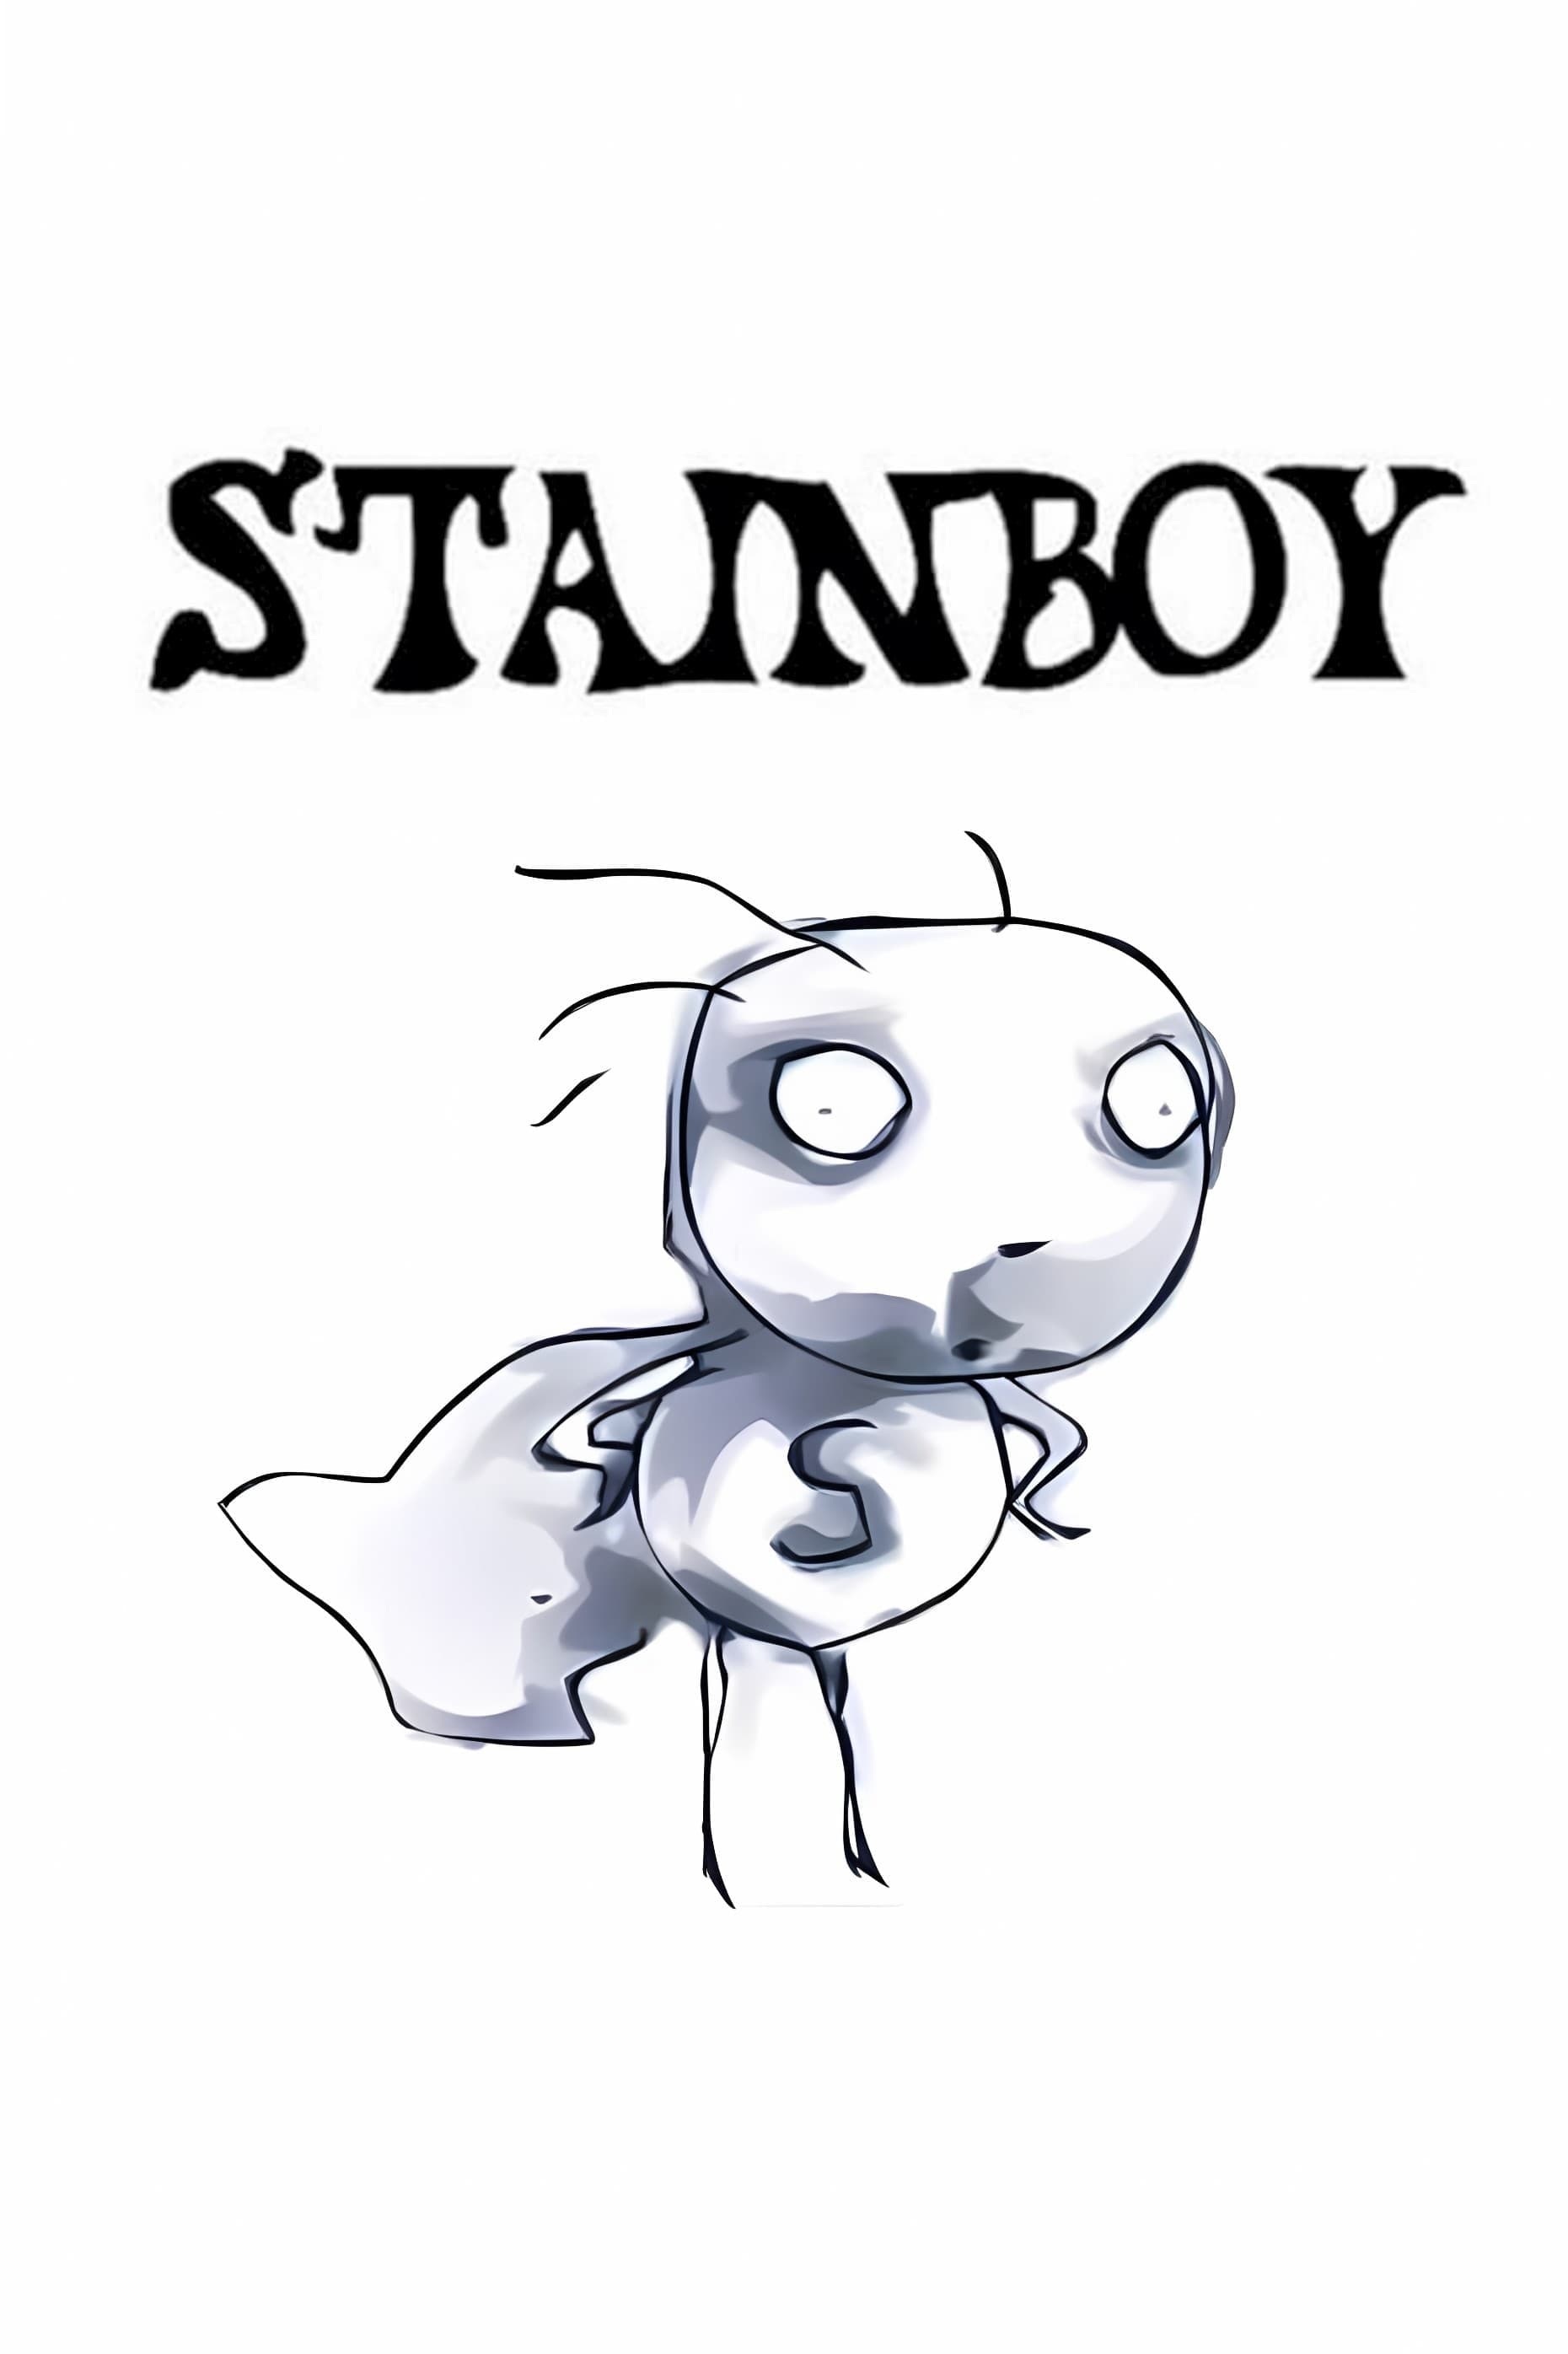 The World of Stainboy